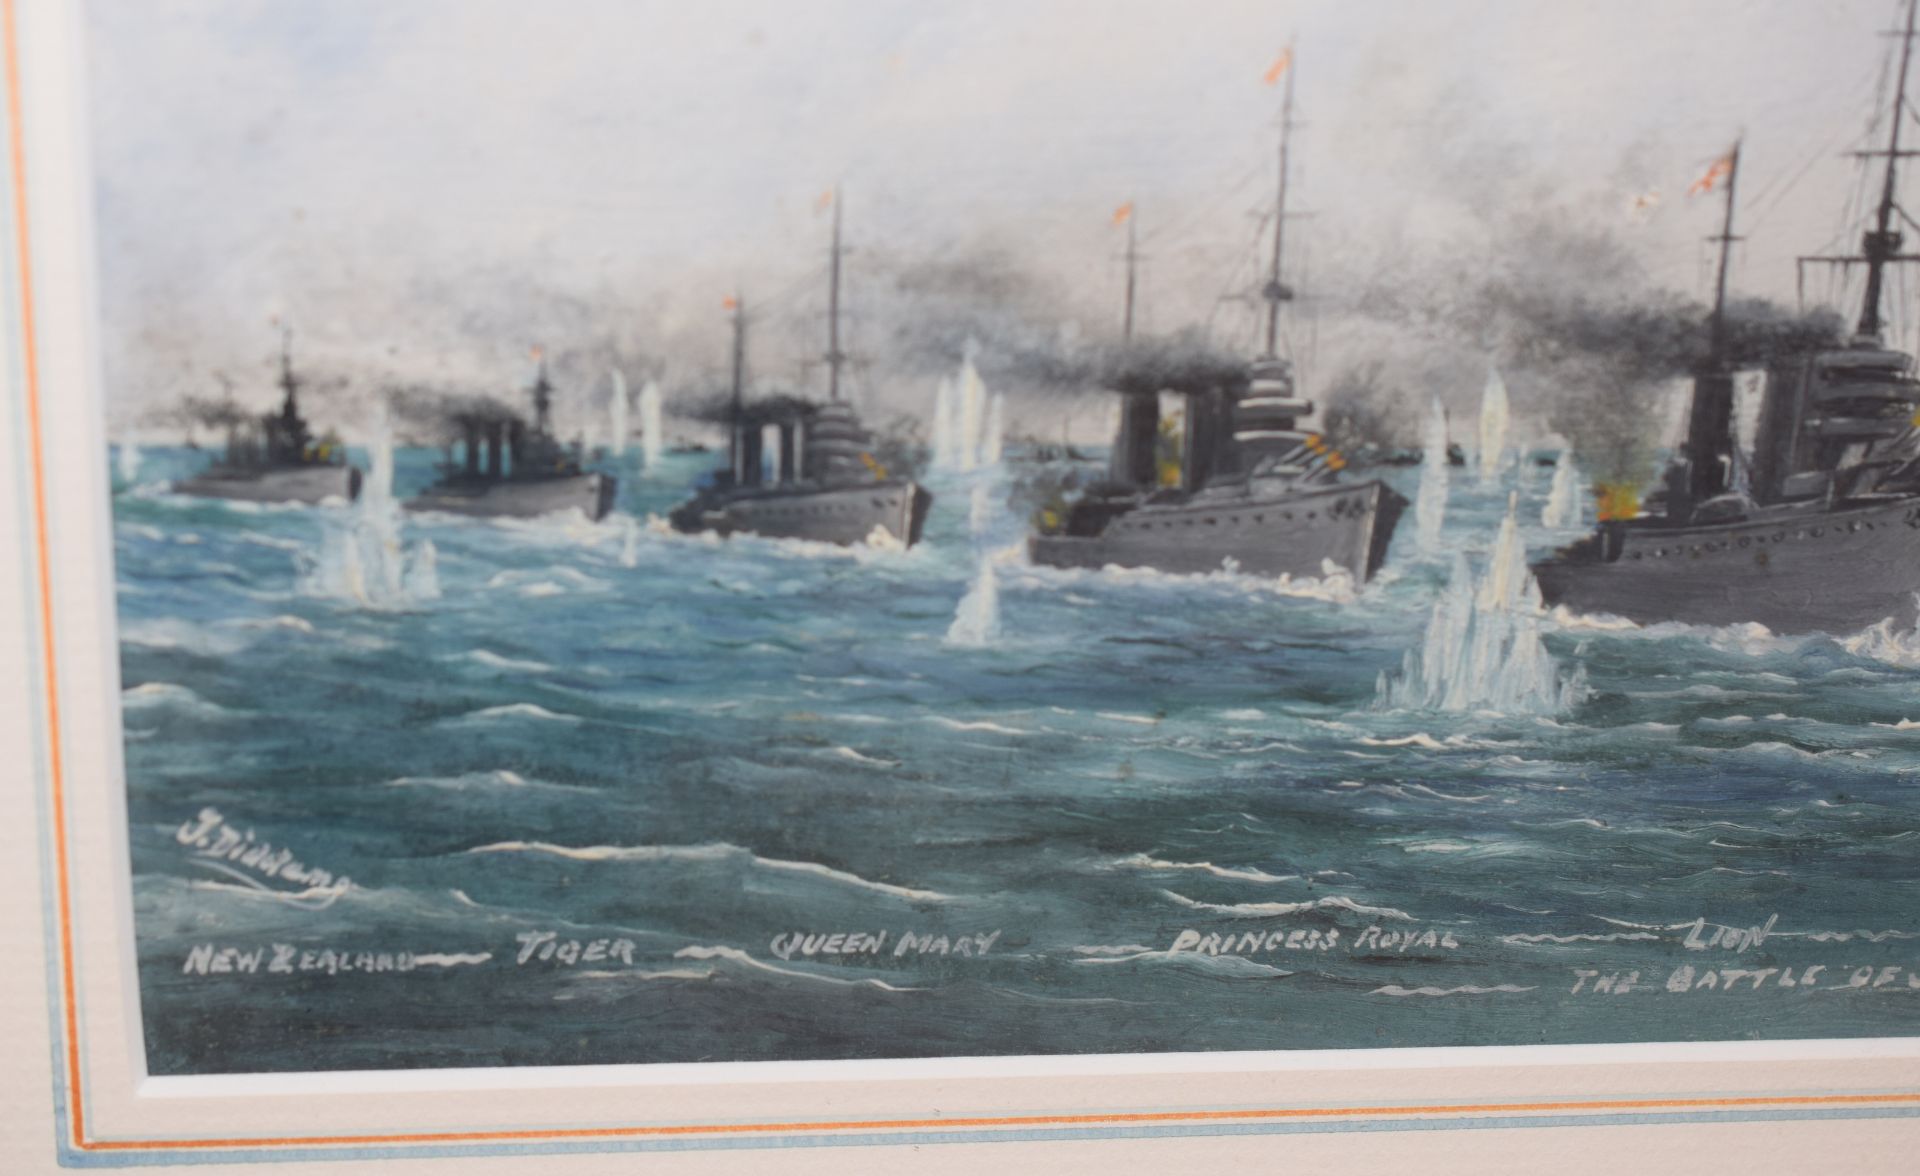 The Battle Of Jutland at 4pm 31st May Oil Painting by James George Diddams - Image 2 of 2